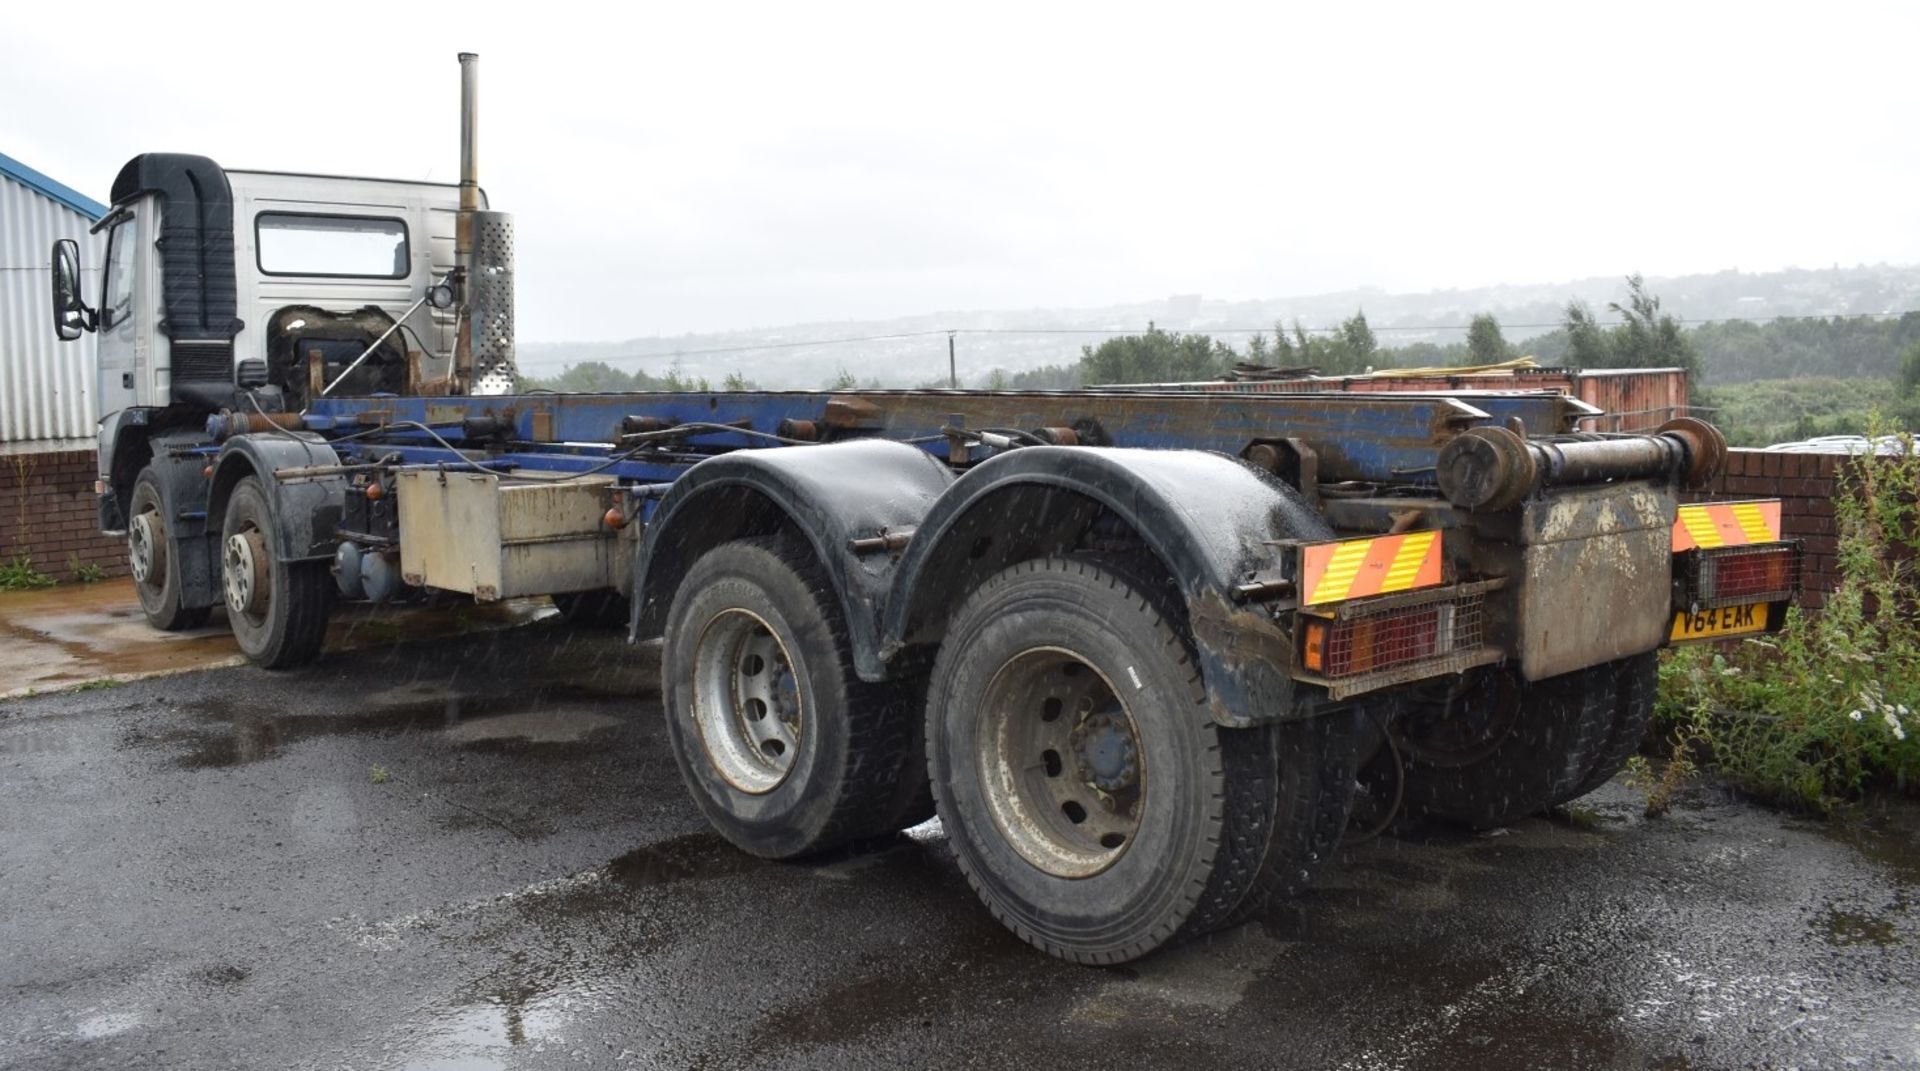 1 x Volvo 340 Plant Lorry With Tipper Chasis and Fitted Winch - CL547 - Location: South Yorkshire. - Image 11 of 25